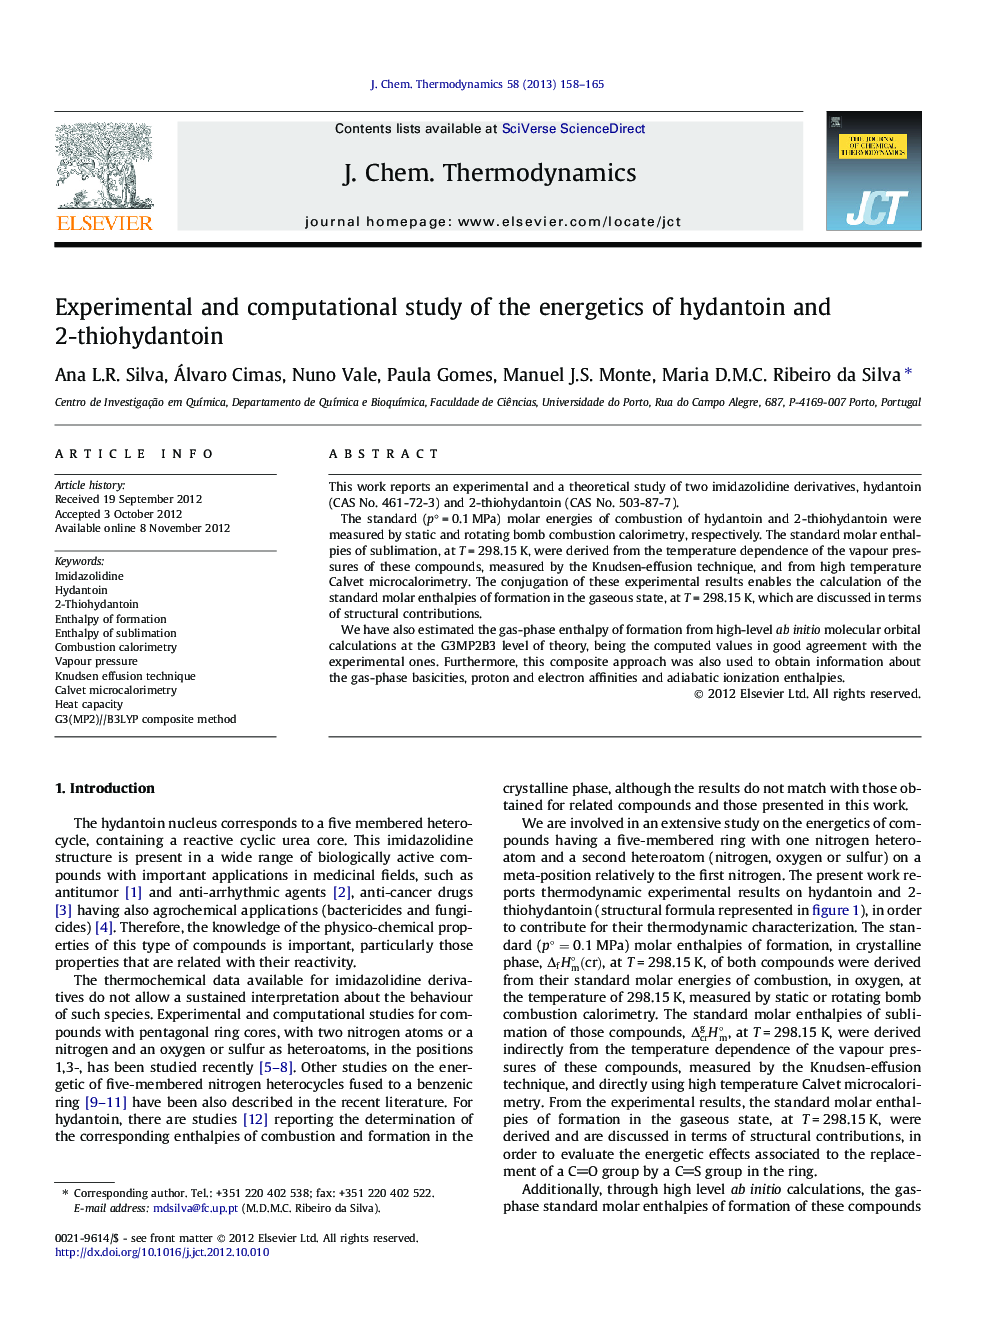 Experimental and computational study of the energetics of hydantoin and 2-thiohydantoin